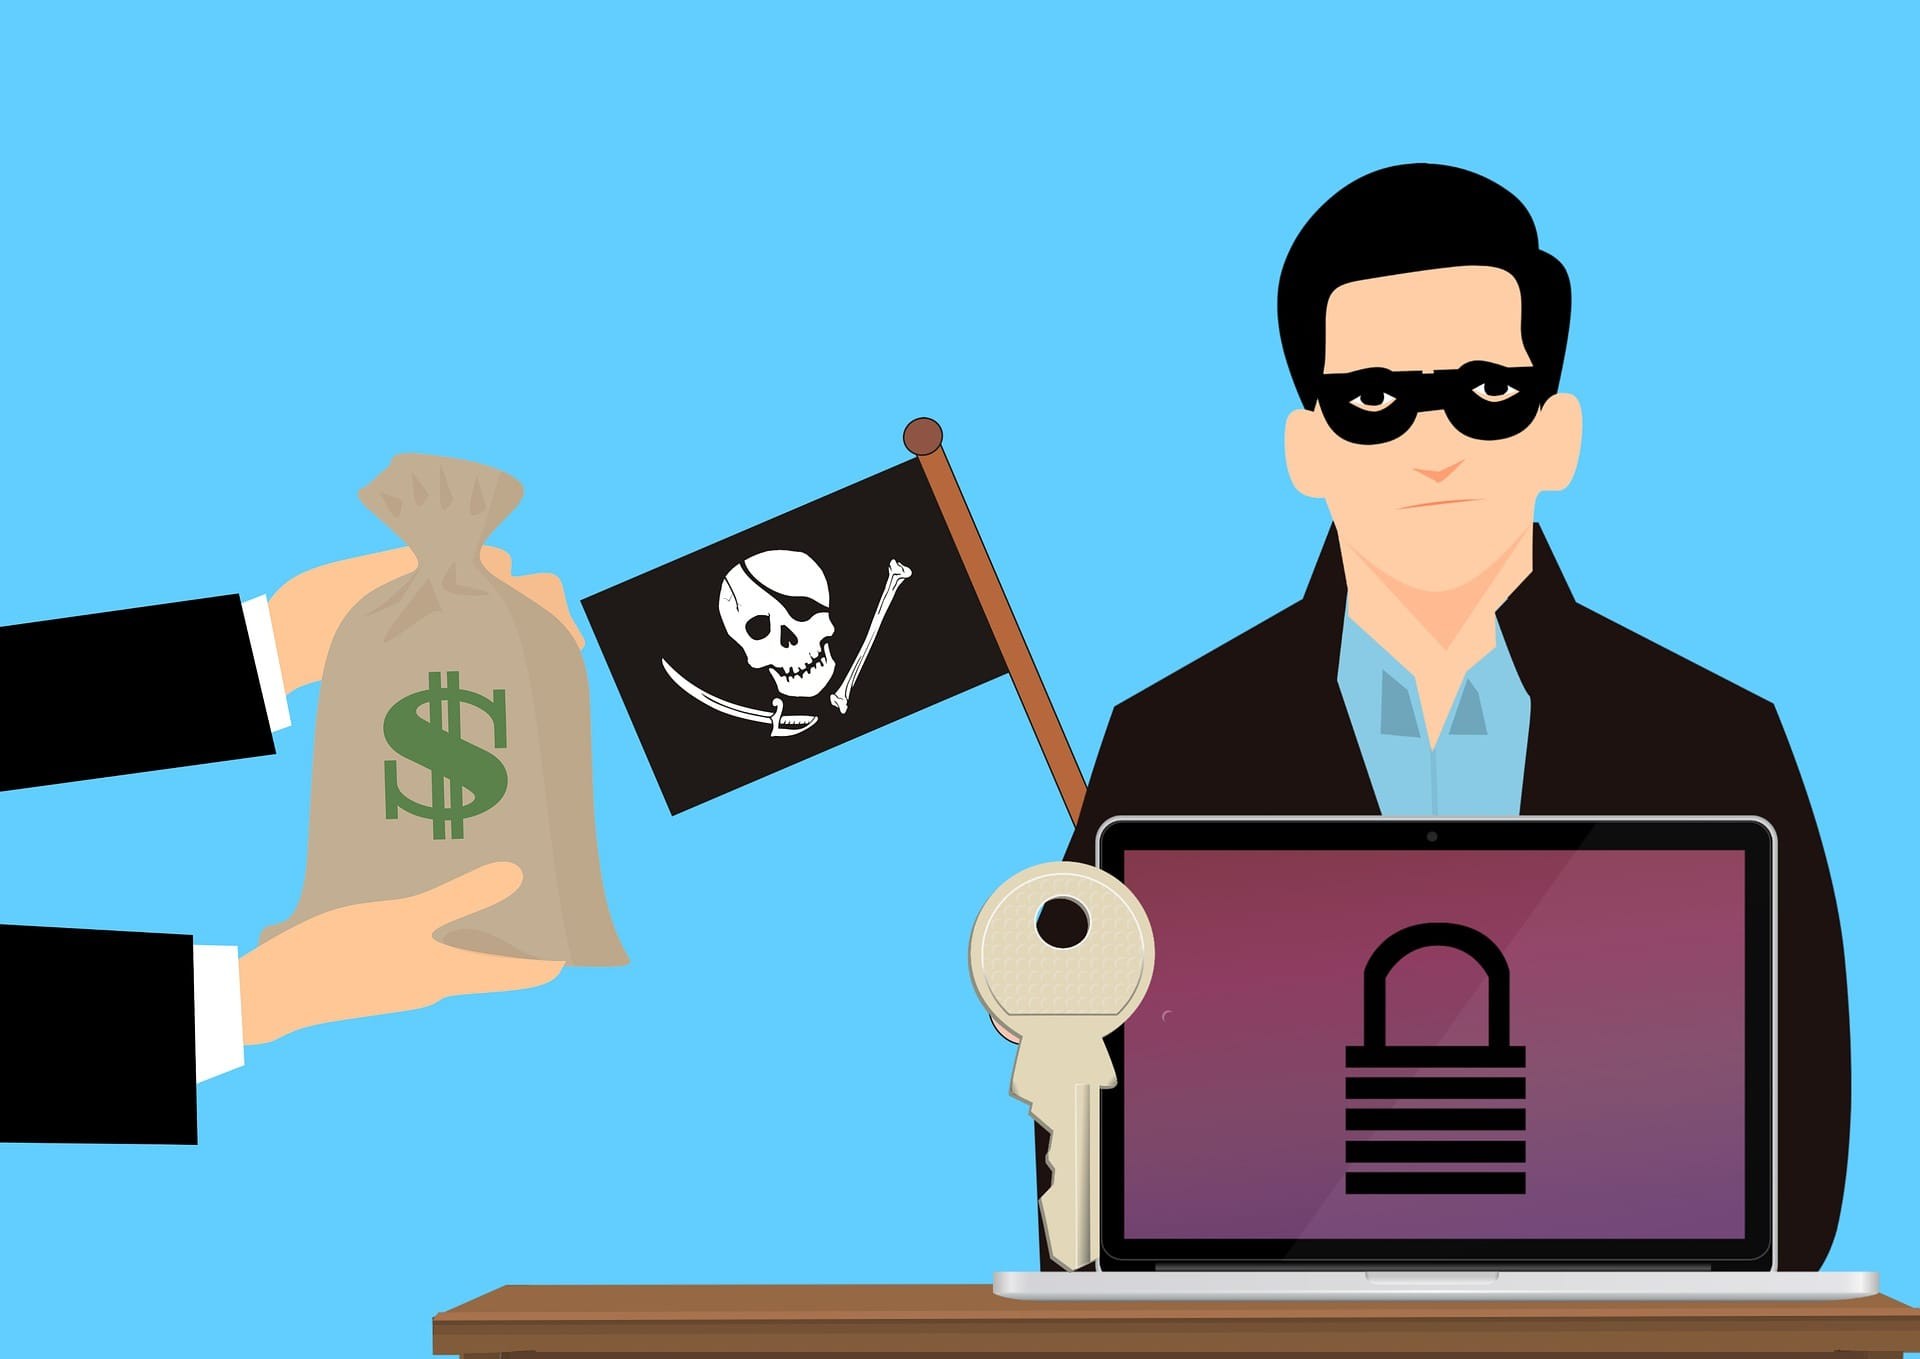 Ransomware attacks spike by 140%, 57% of organizations agree to pay